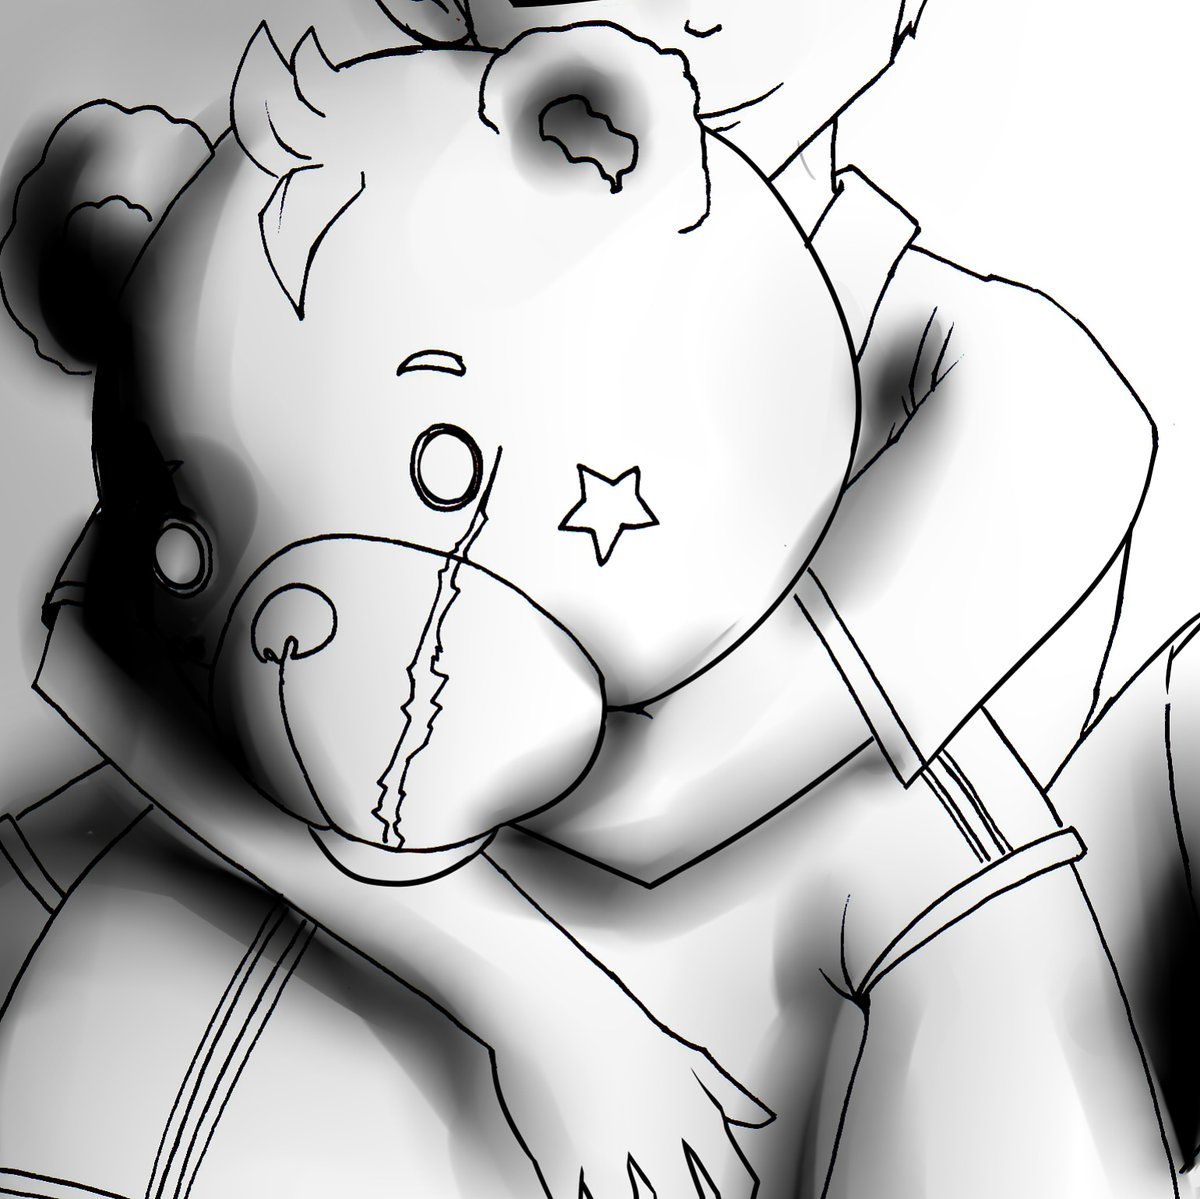 'Don't you dare surrender. Don't leave me here without you. 'Cause I could never, replace your perfect imperfection.' (WIP)

#mumur1 #noir #greyscale #anime #manga #darkart #beardoll #horror #horrorart #thriller #ilustrasi #ilustratorindonesia #workinprogress